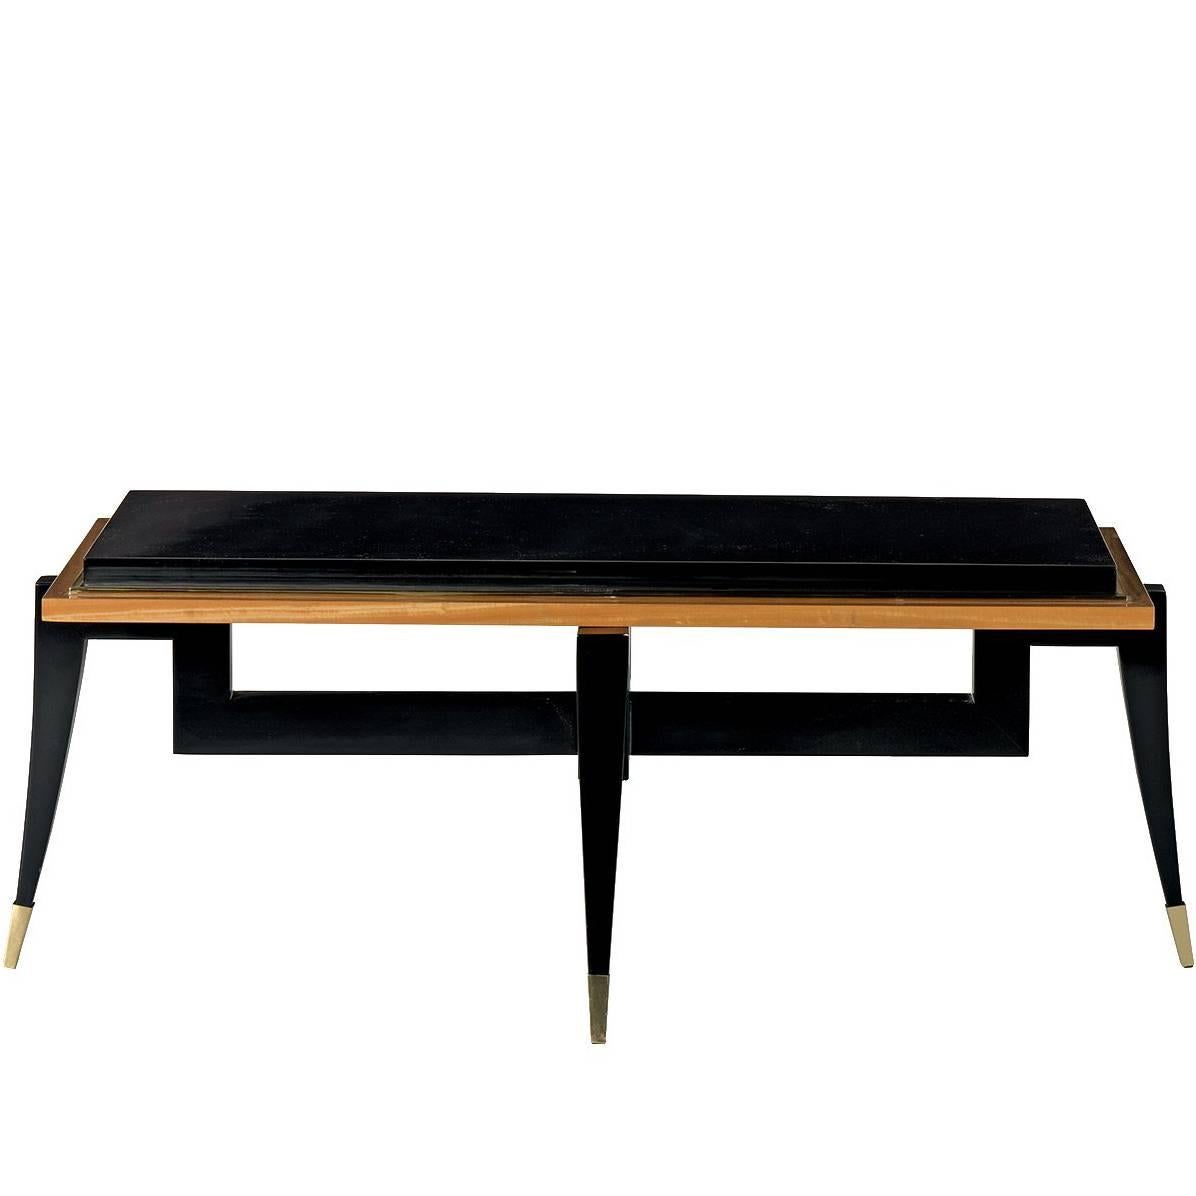 Citronnier Wood Coffee Table with Black Finish